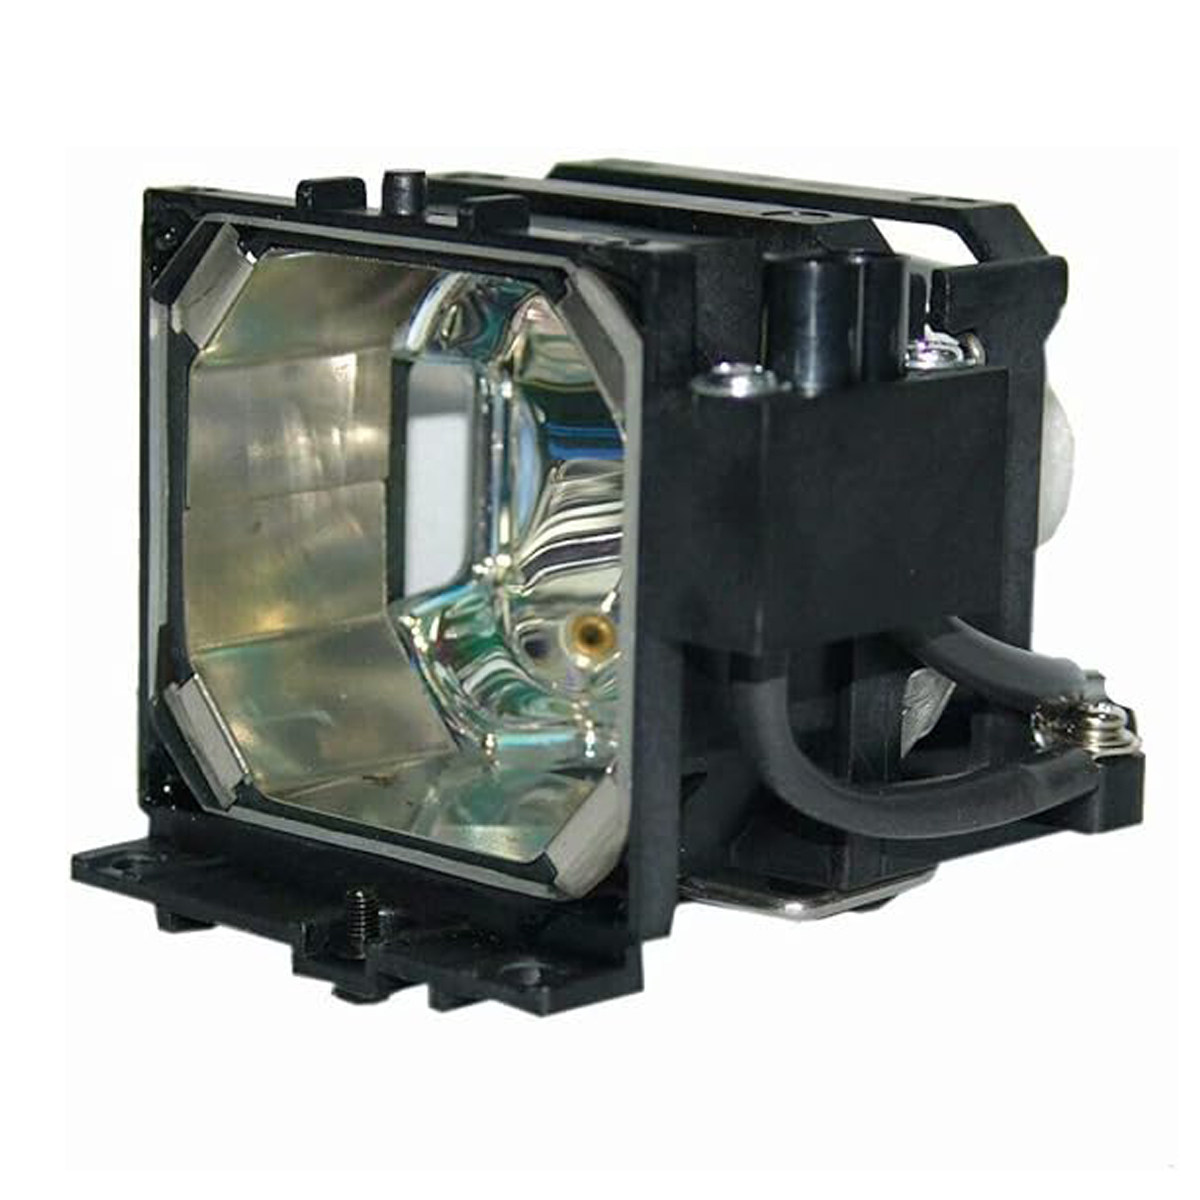 Replacement Projector lamp LMP-H150 For Sony VPL HS2 VPL HS3